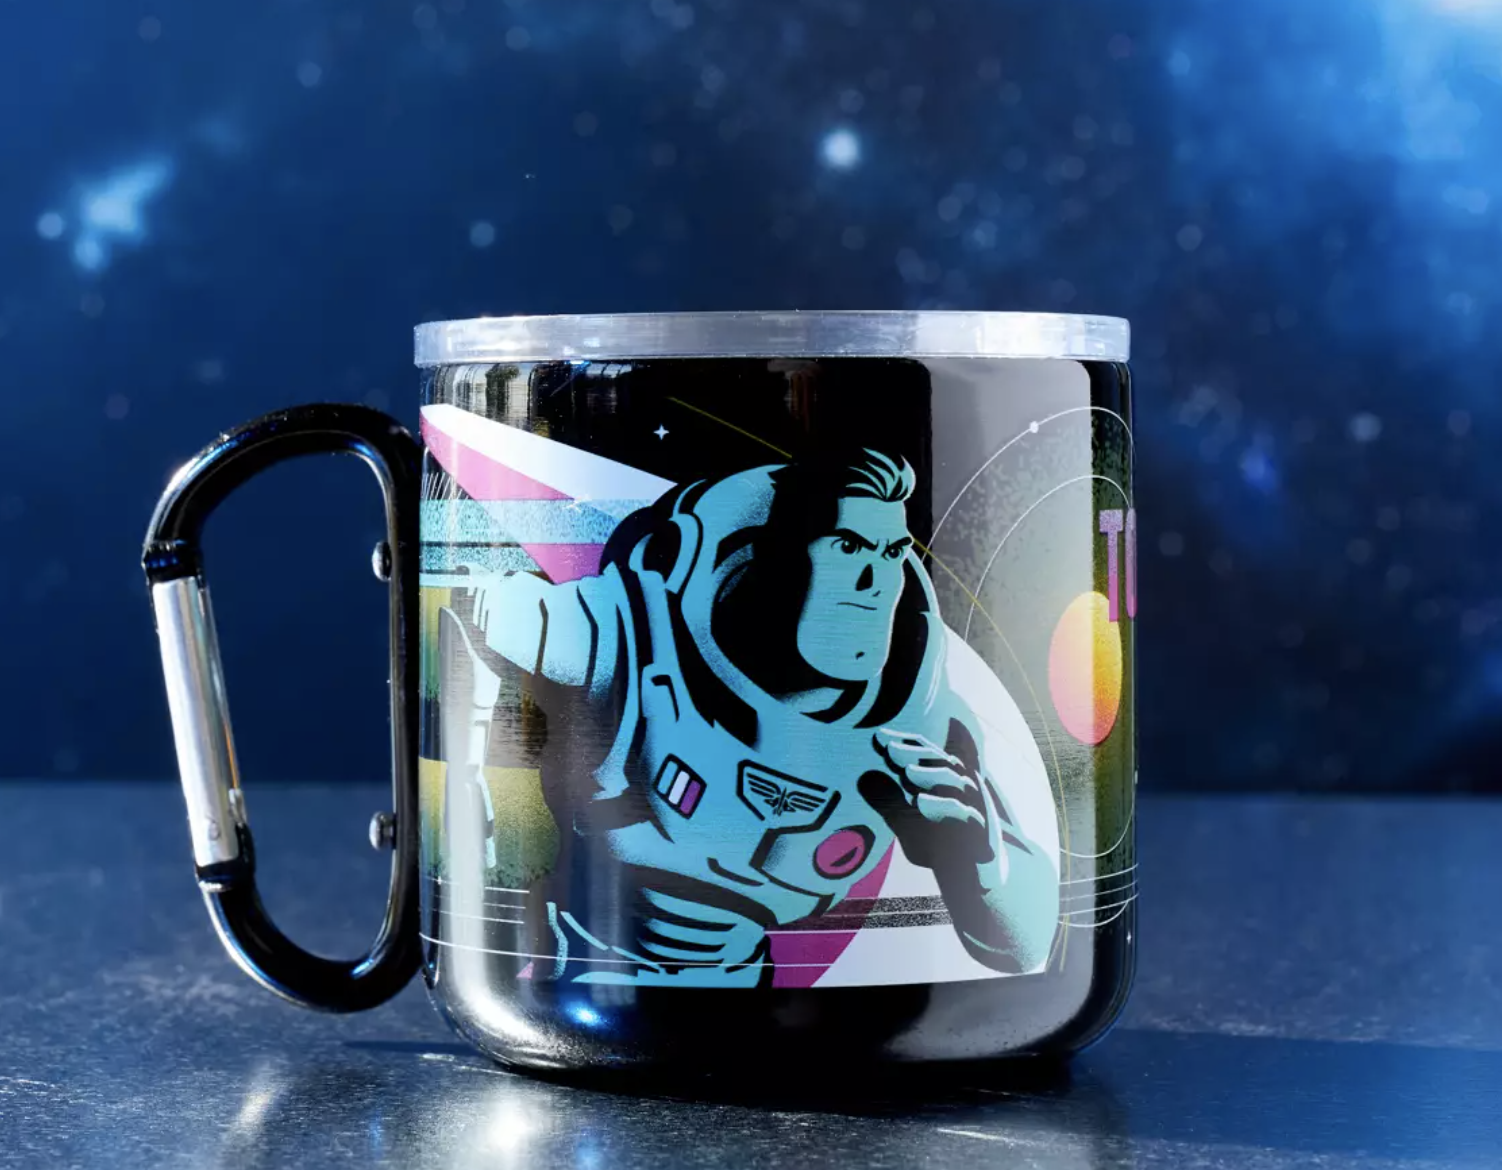 A Buzz Lightyear stainless steel mug with a cover